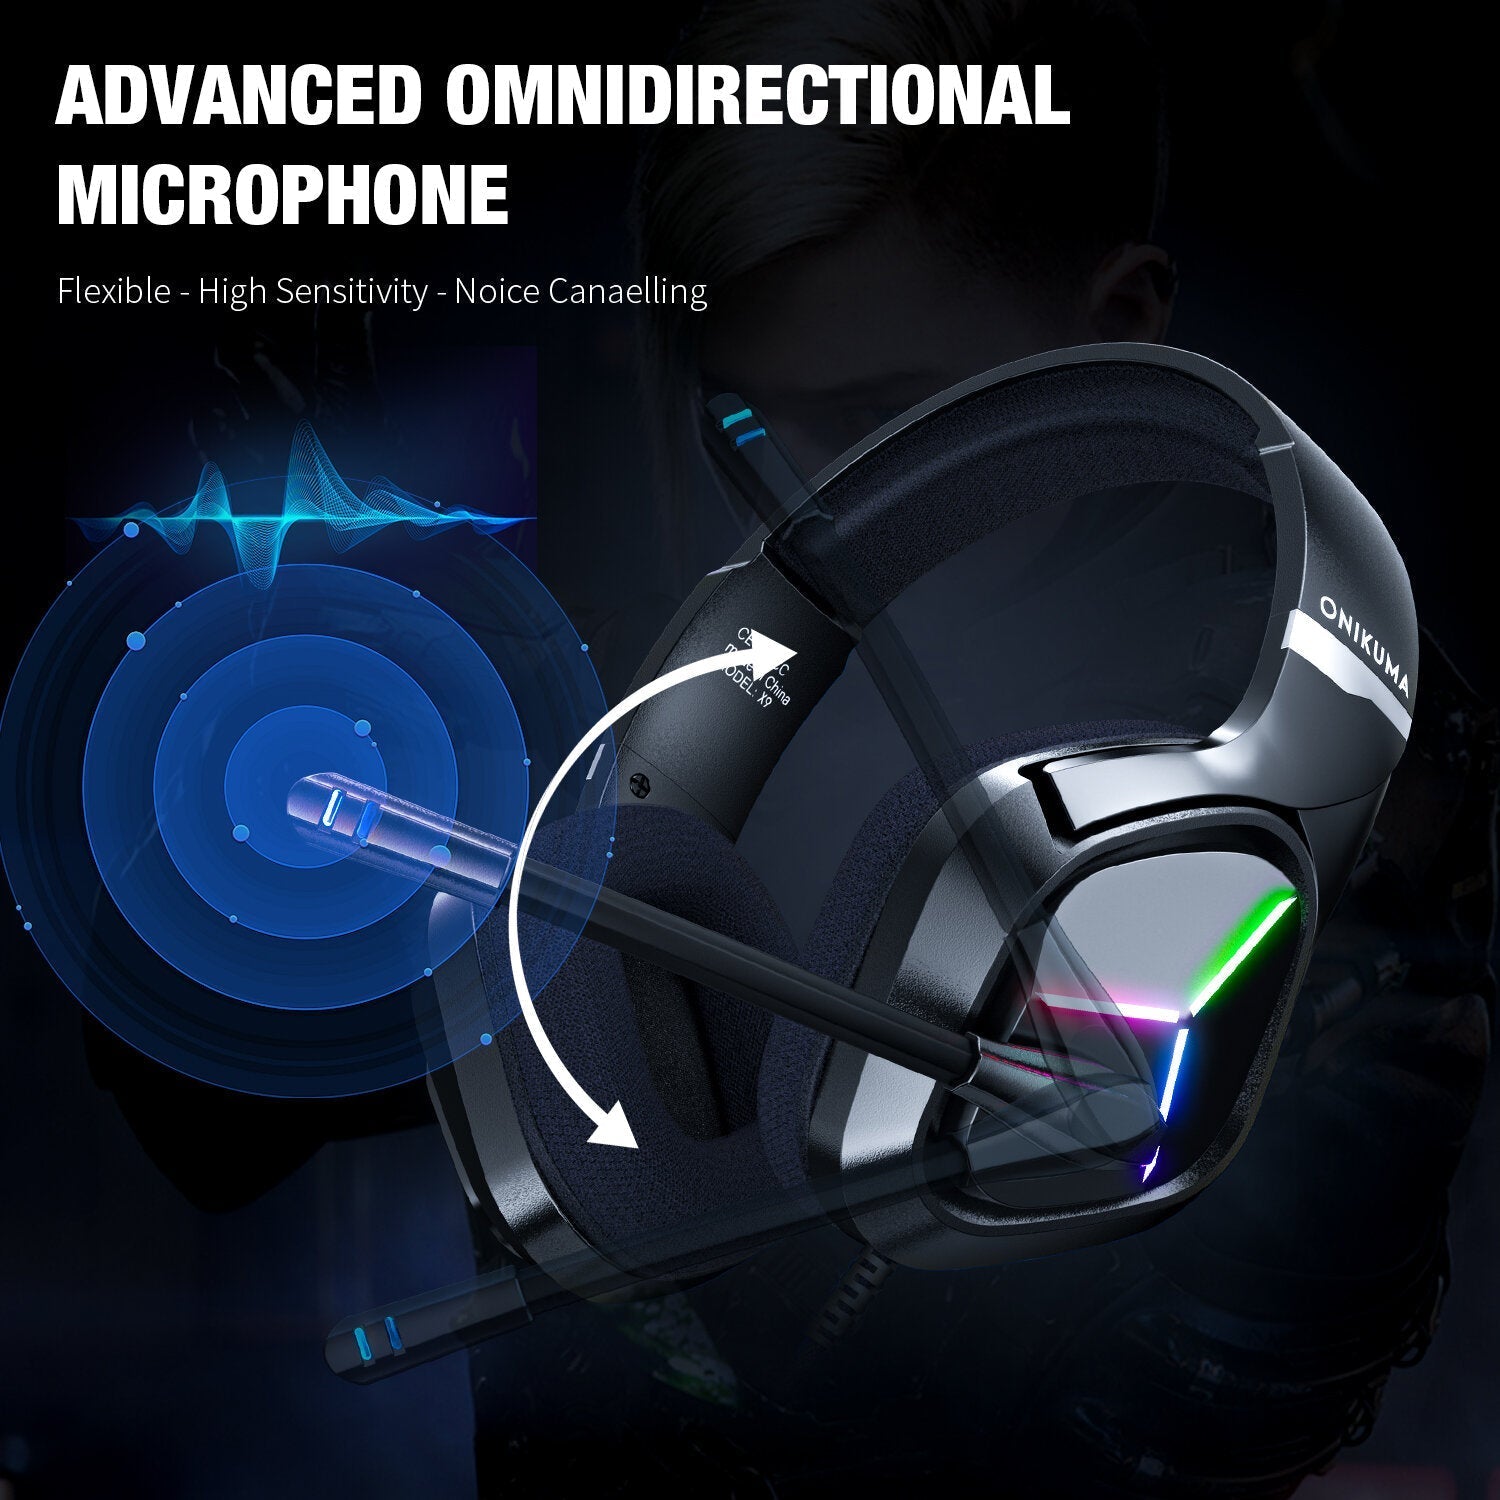 Audio Wired 3.5mm Headphones Noise Cancelling Bass Surround Soft Memory Earmuffs Gaming Headset With Microphone